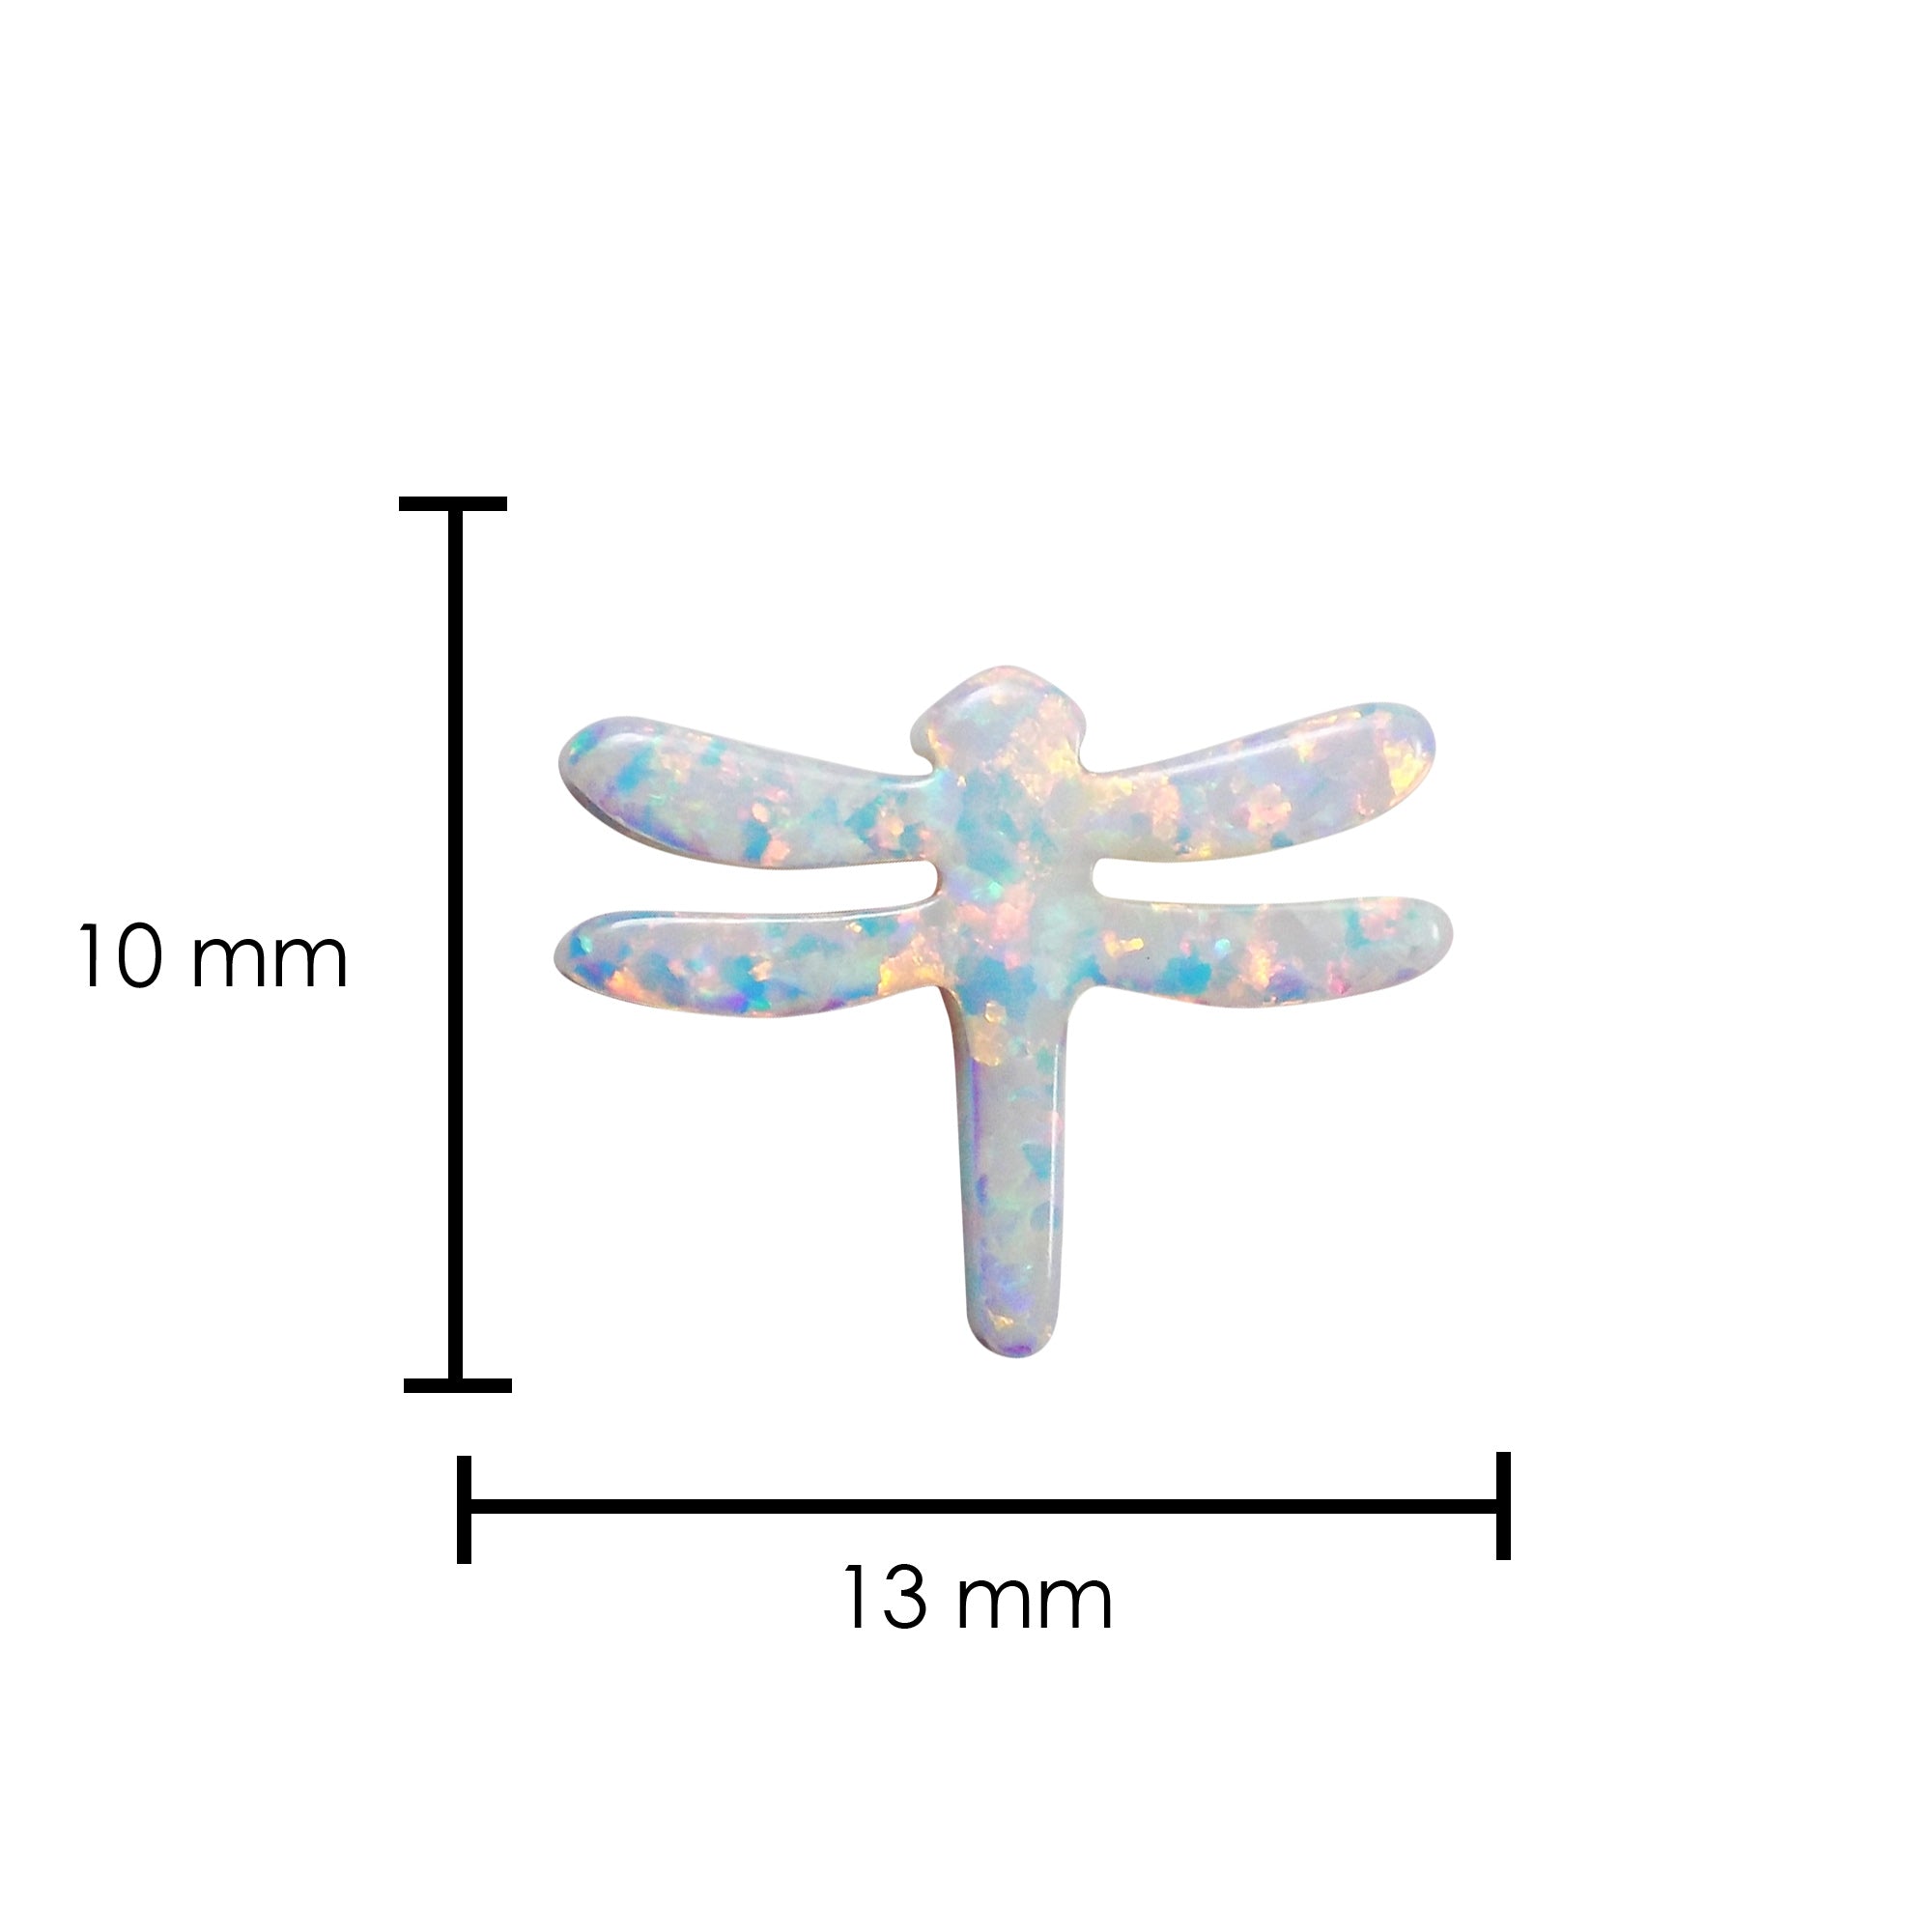 Opal Dragonfly Charm, Dragonfly Opal Bead Charm Pendant Size 10x13mm, Authentic Lab-created White Opal Dragonfly Bead, USA Seller